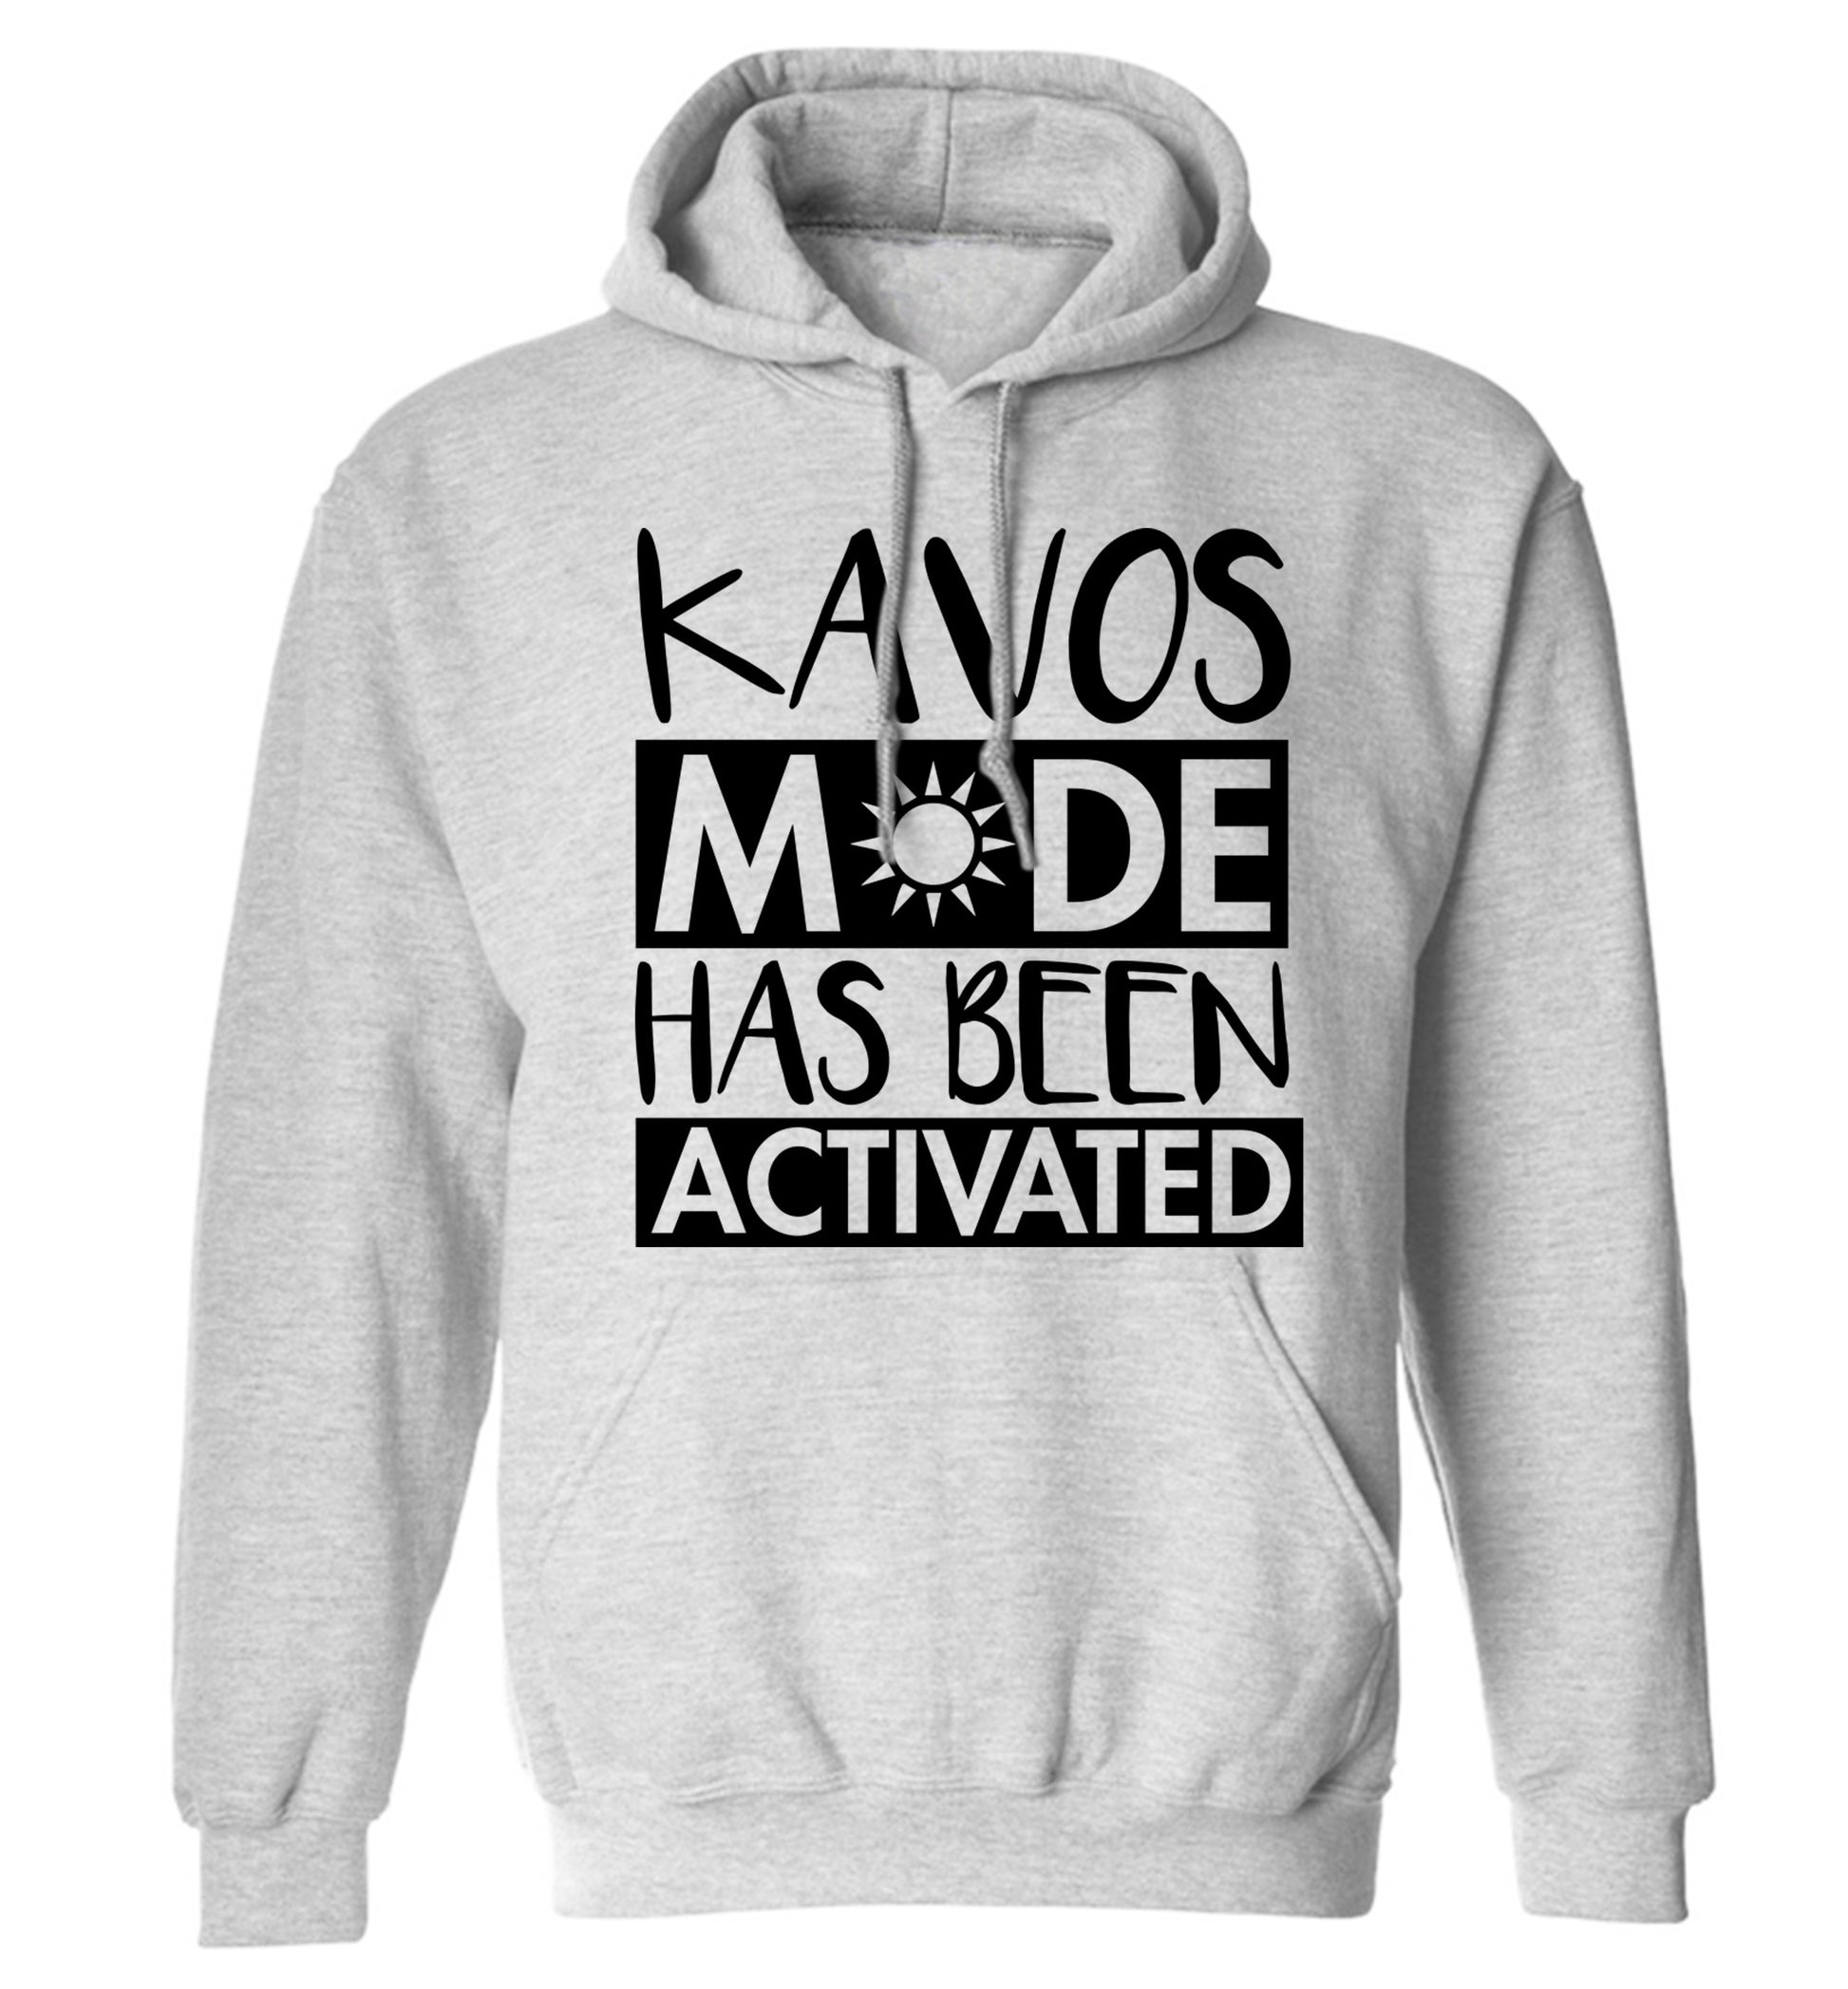 Kavos mode has been activated adults unisex grey hoodie 2XL